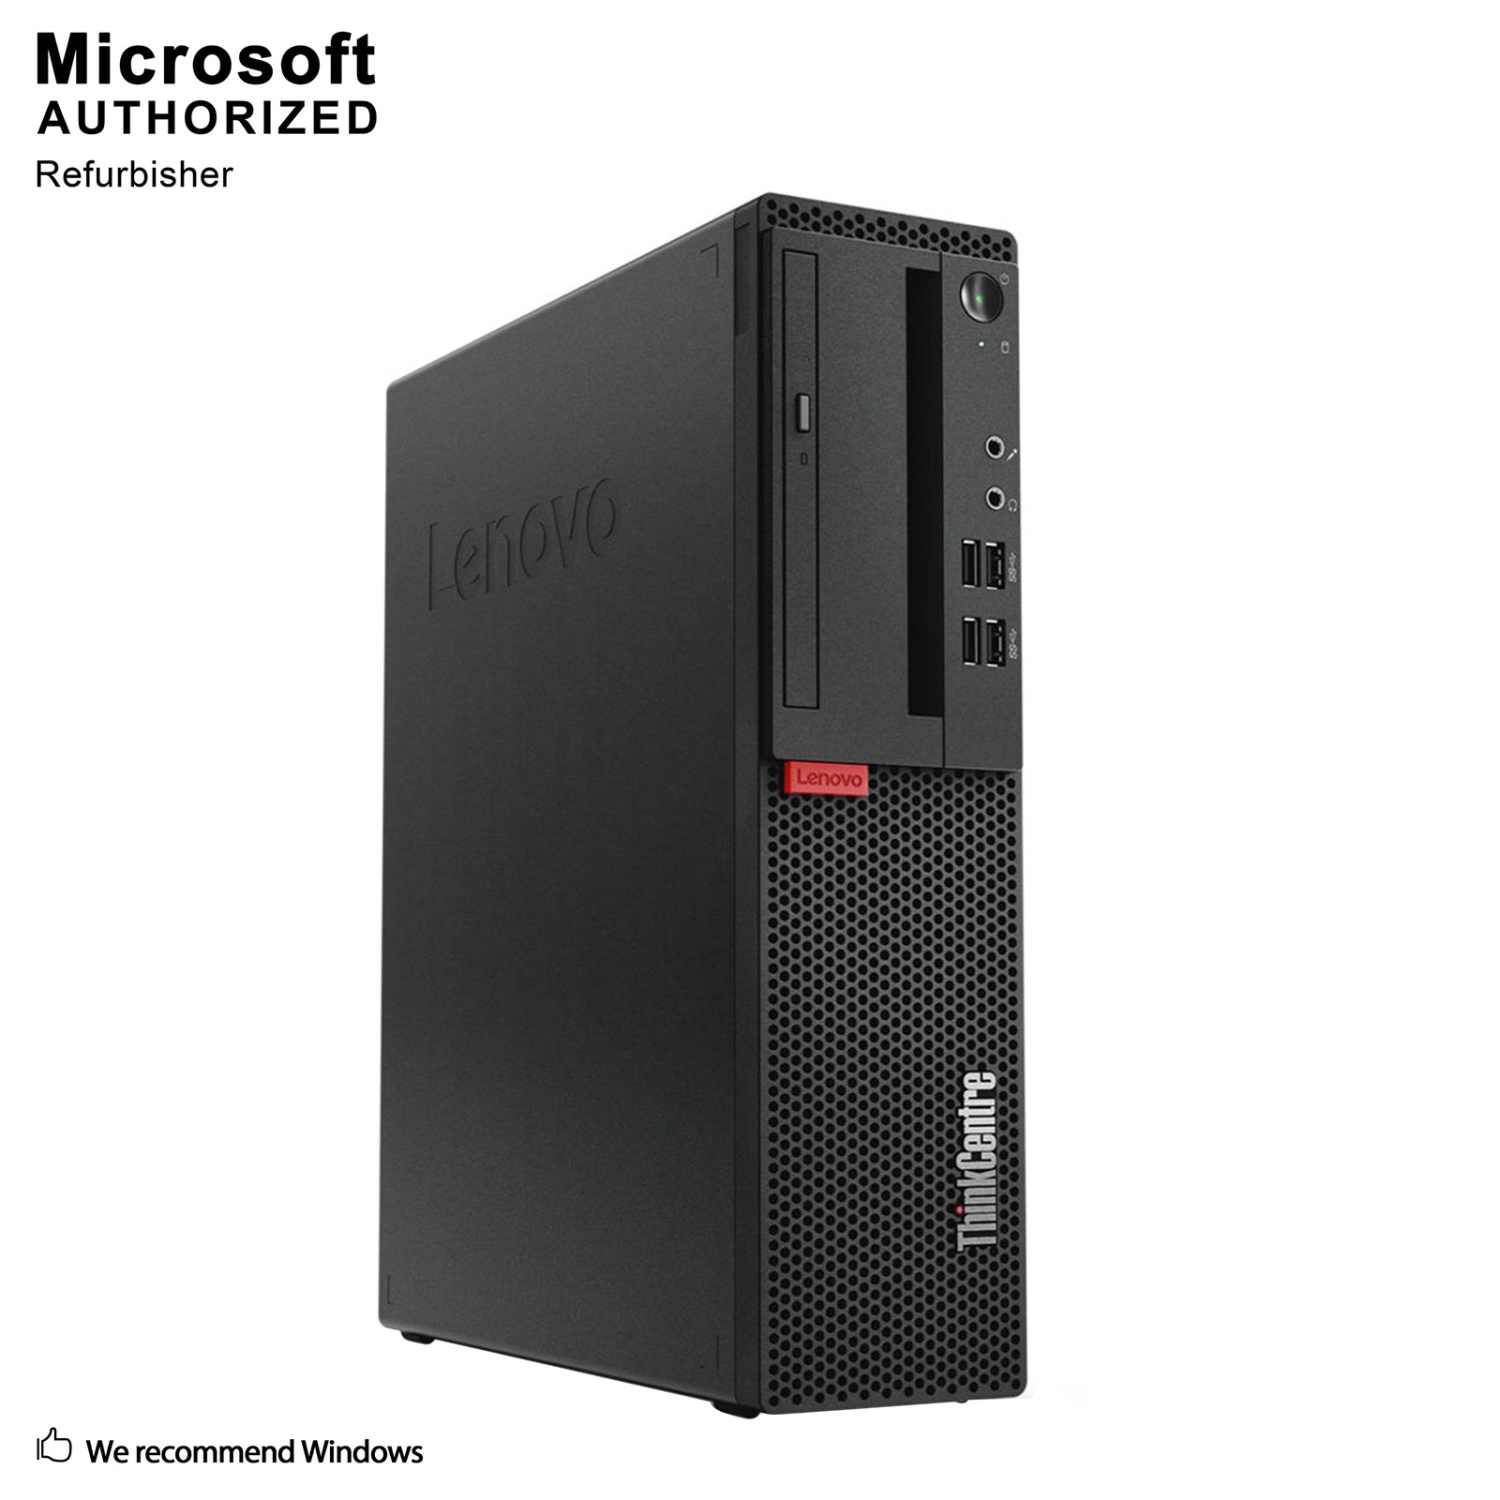 Refurbished (Good) - Lenovo ThinkCentre M910S SFF PC, Intel Core I5-6500 3.2Ghz, 8G DDR4, 512 GB SSD, DVD, 4K Support, Keyboard & Mouse, Win 10 Pro 64-bit (EN/ES/FR)